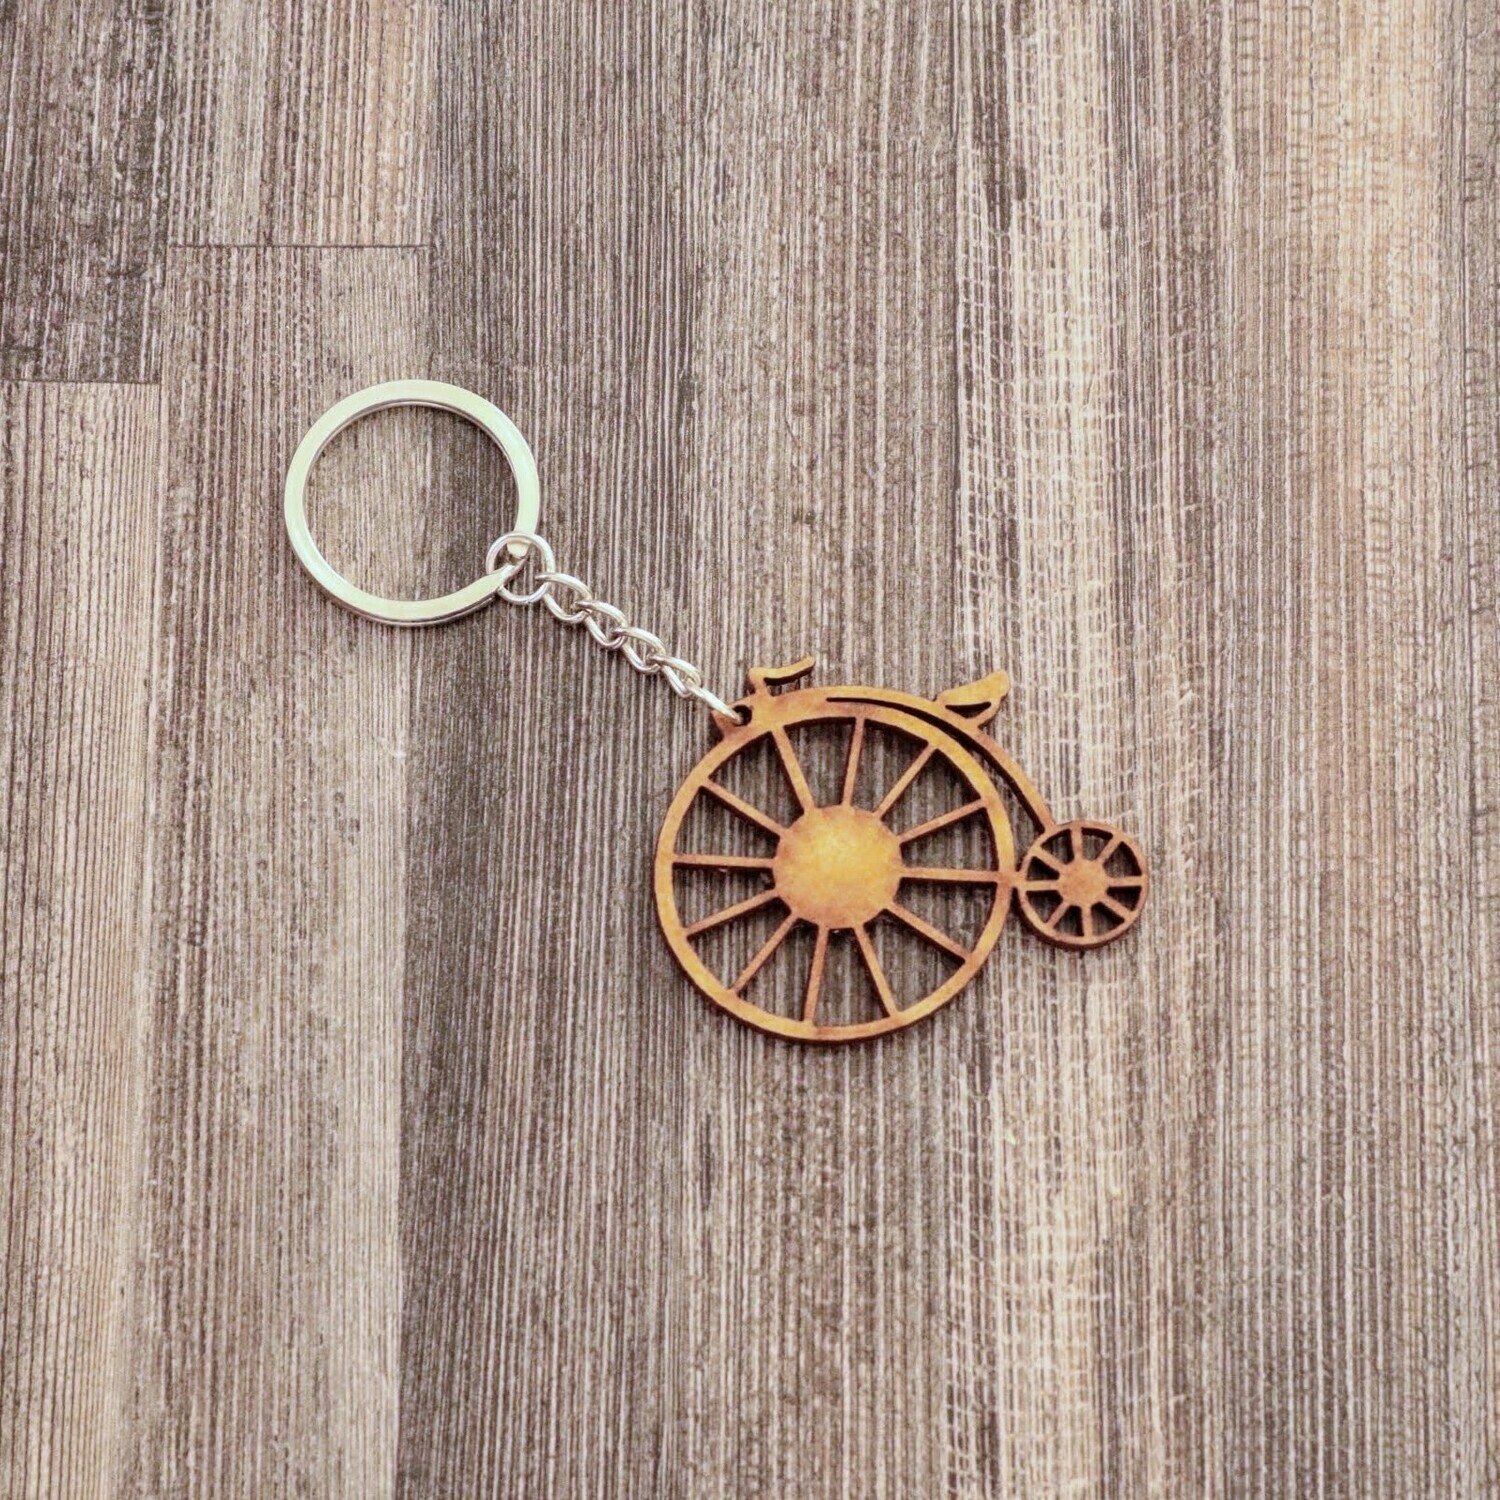 Penny Farthing Bicycle Wooden Keychain